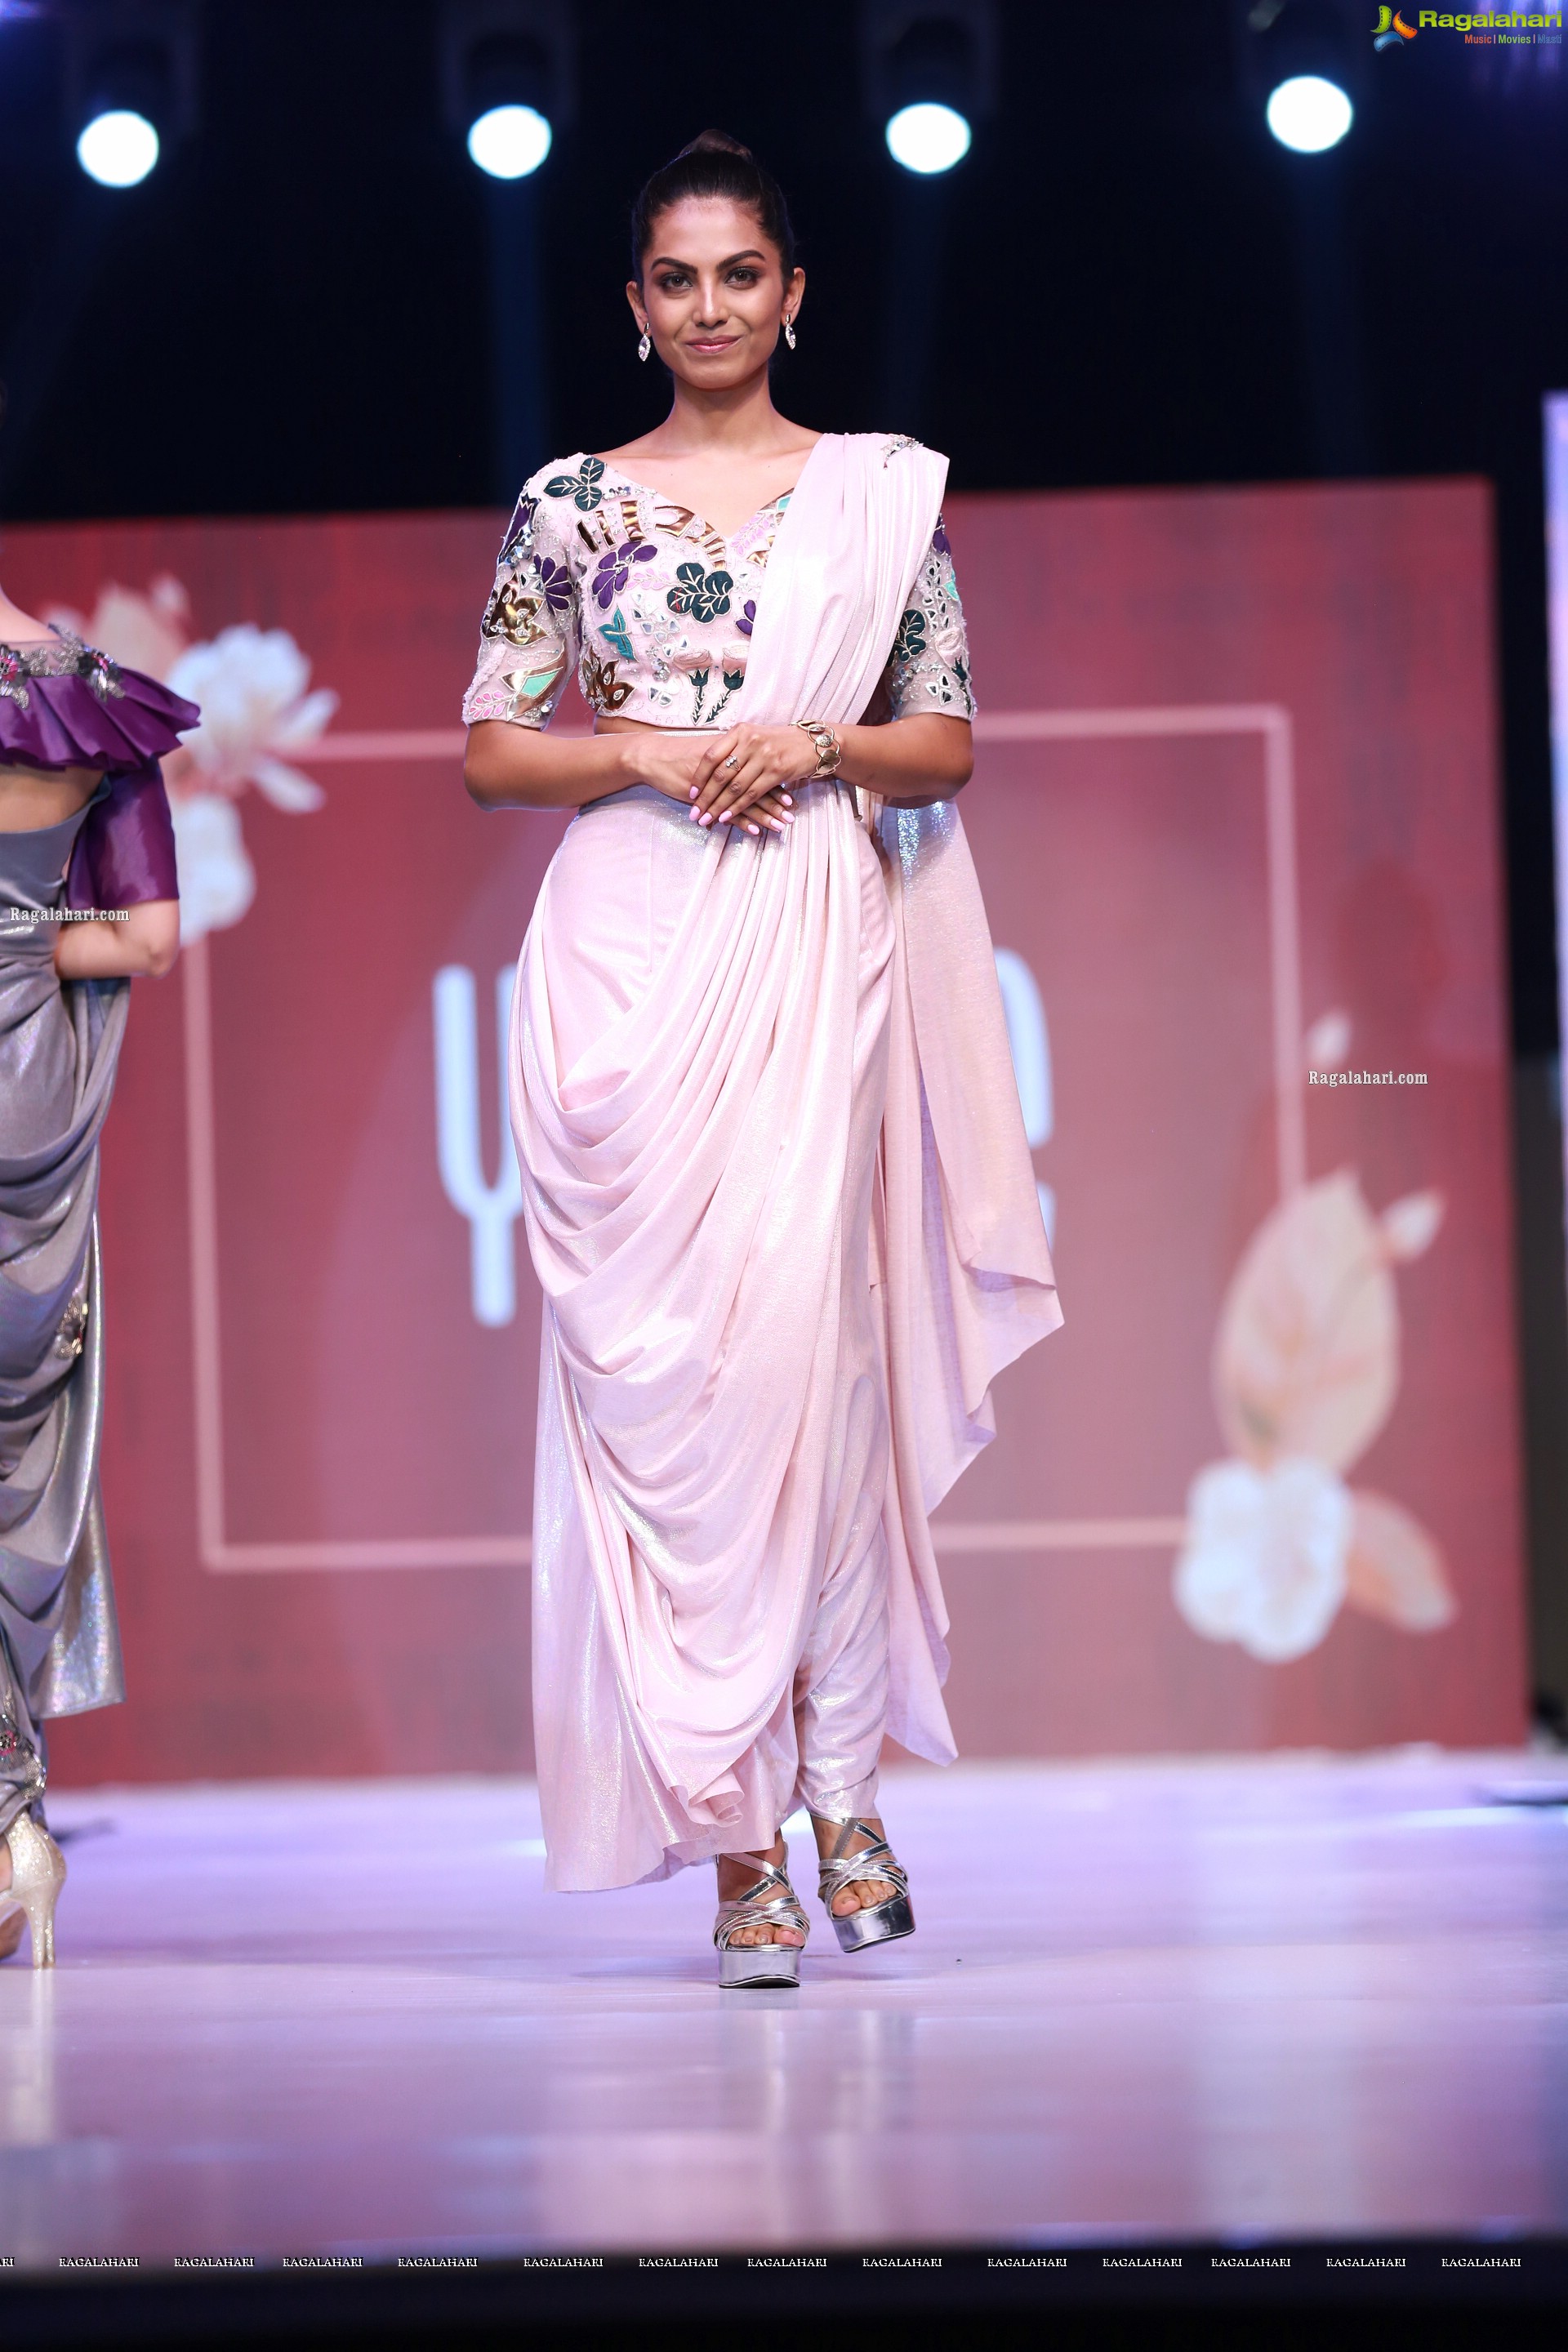 Youve Launch Exclusively at Rangoli and Fashion Show at Taj Deccan